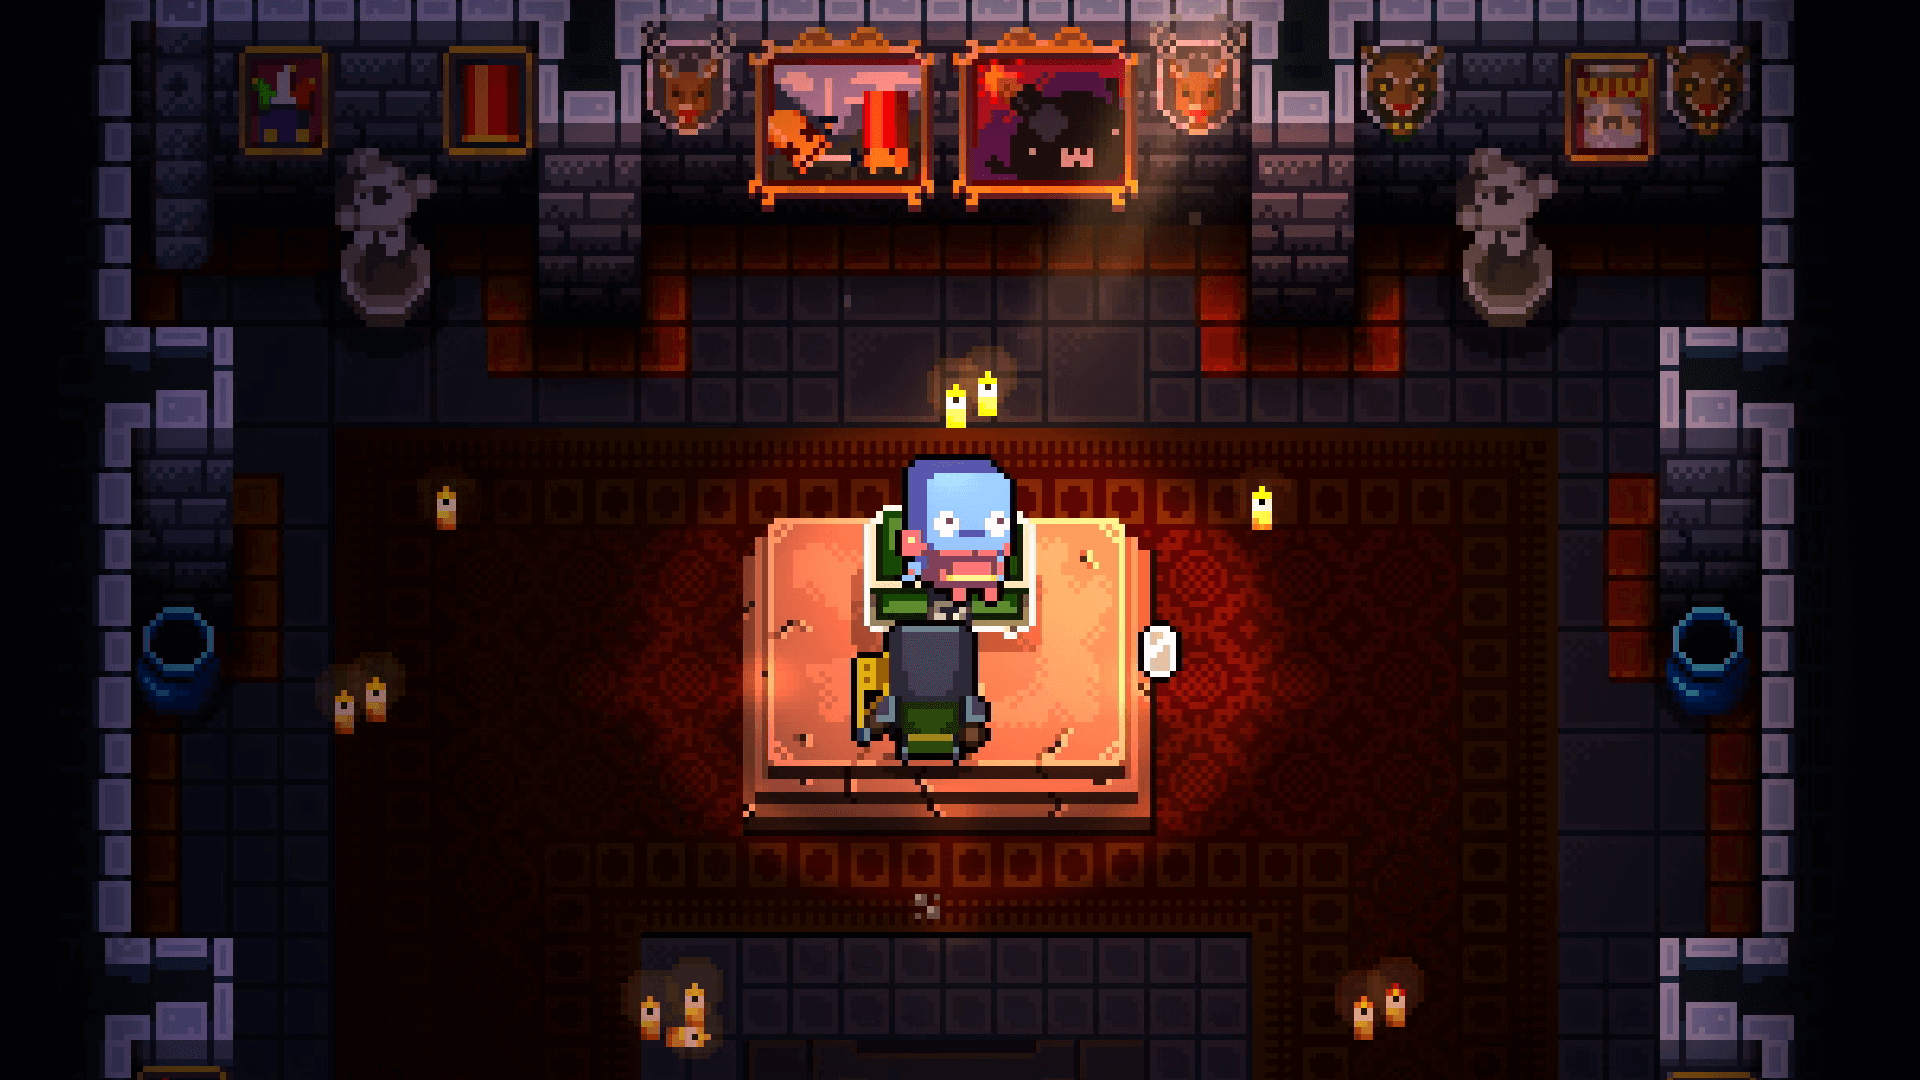 http://www.cosmocover.com/wp-content/uploads/2019/03/Enter-the-Gungeon-FTA-Screen-4.png